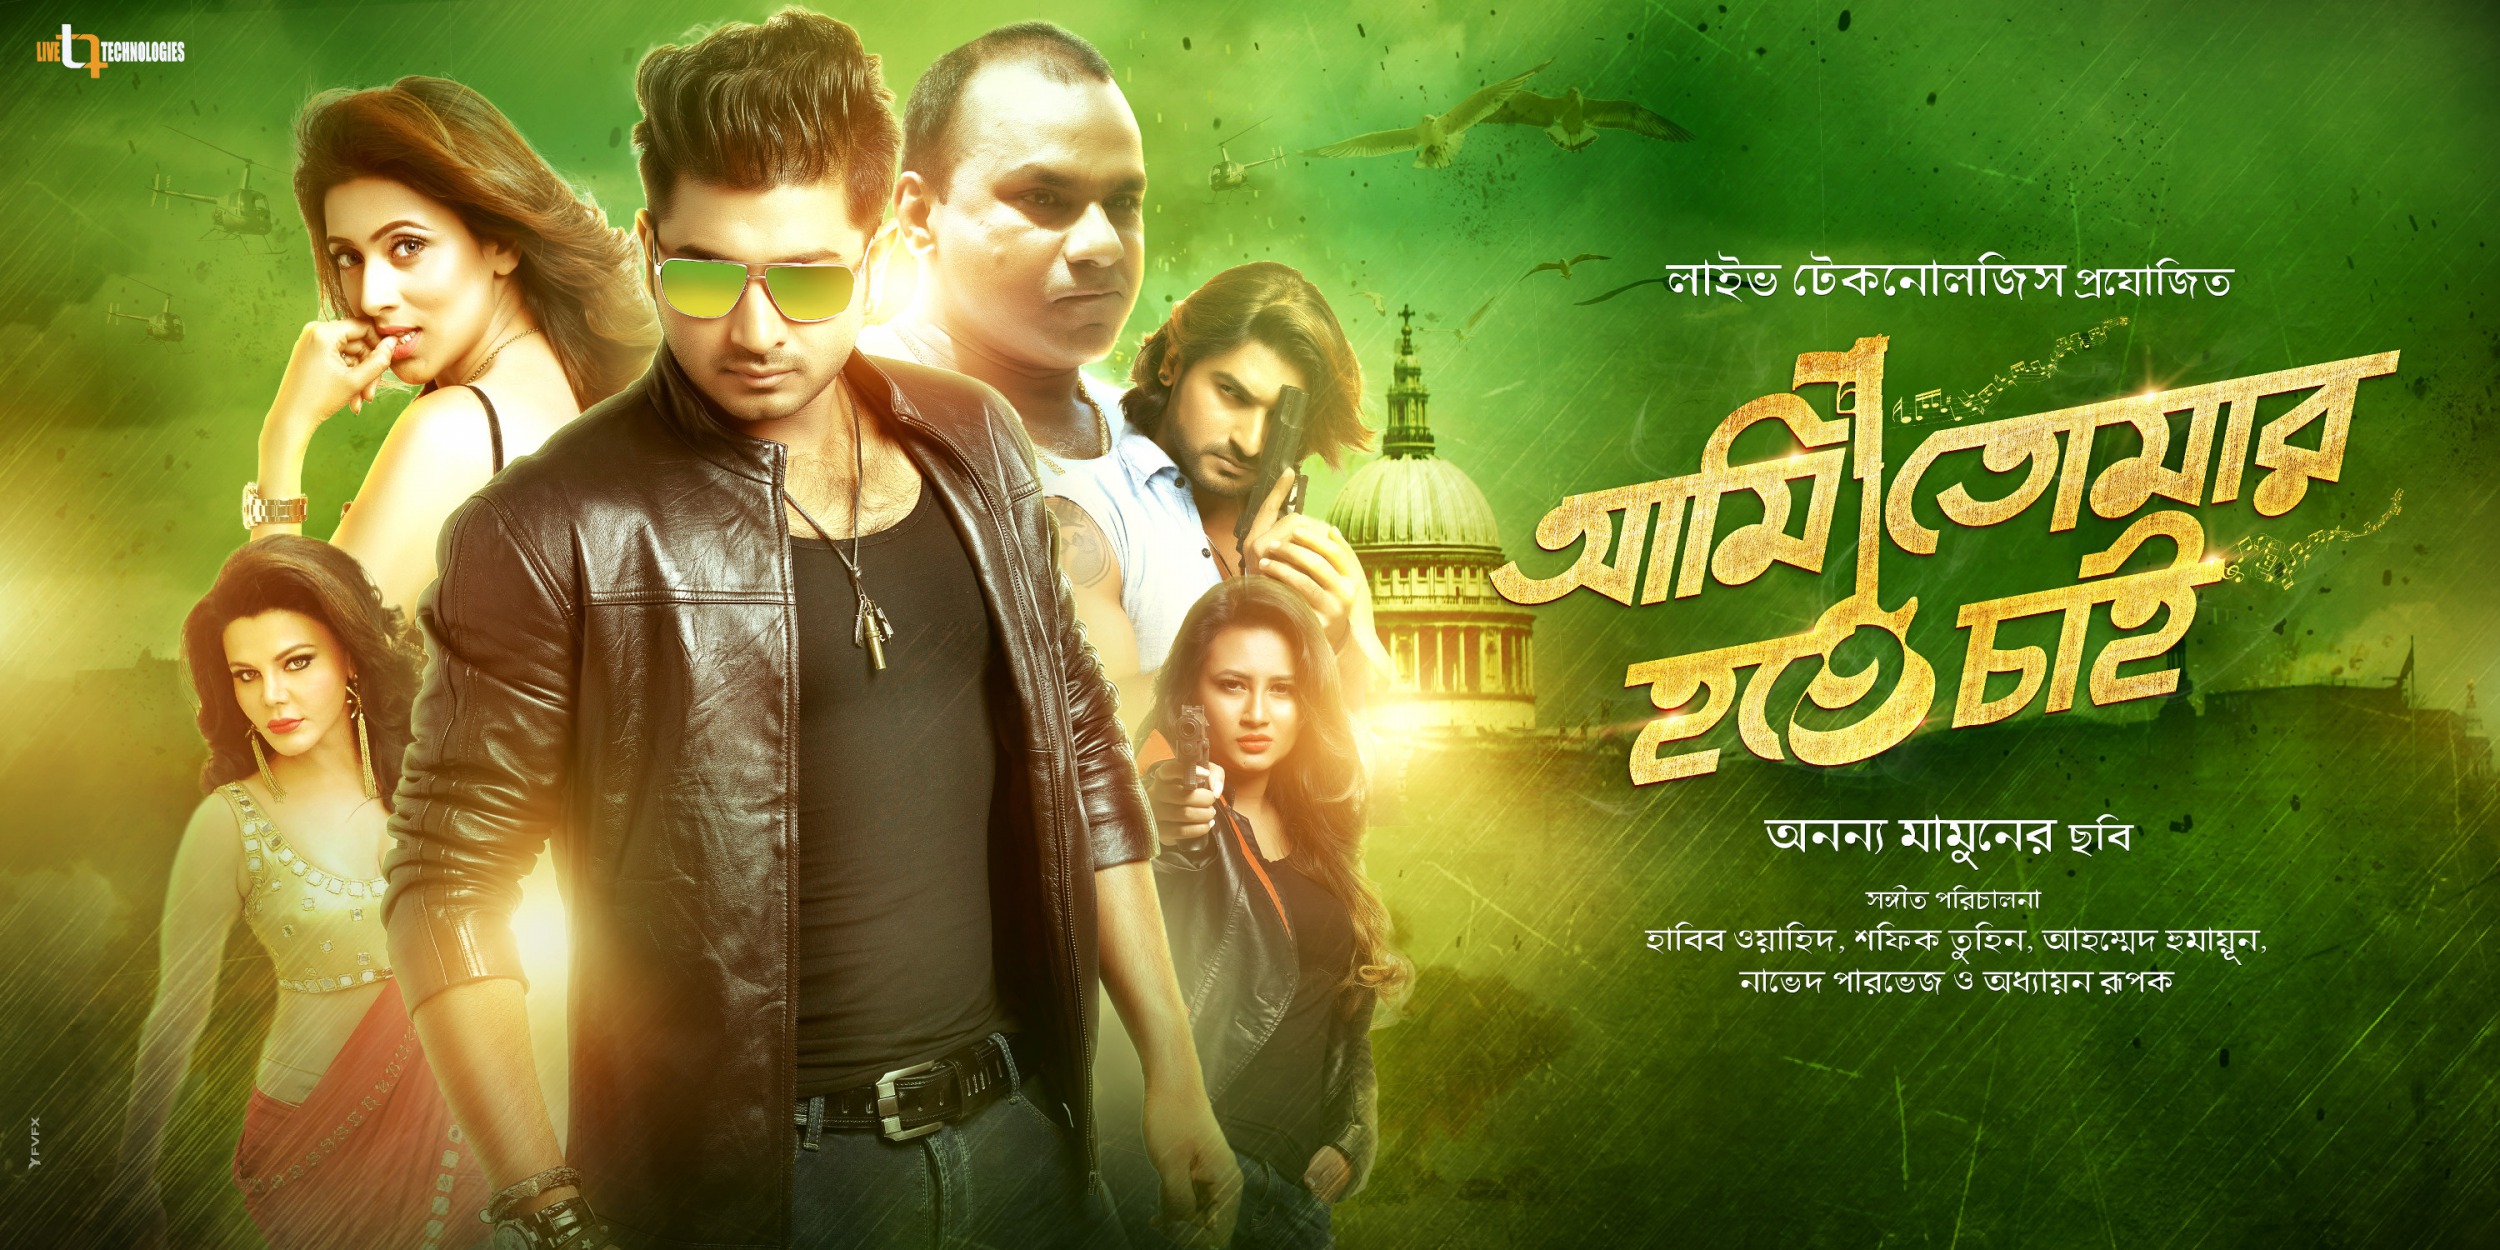 Mega Sized Movie Poster Image for Ami Tomar Hote Chai (#4 of 11)